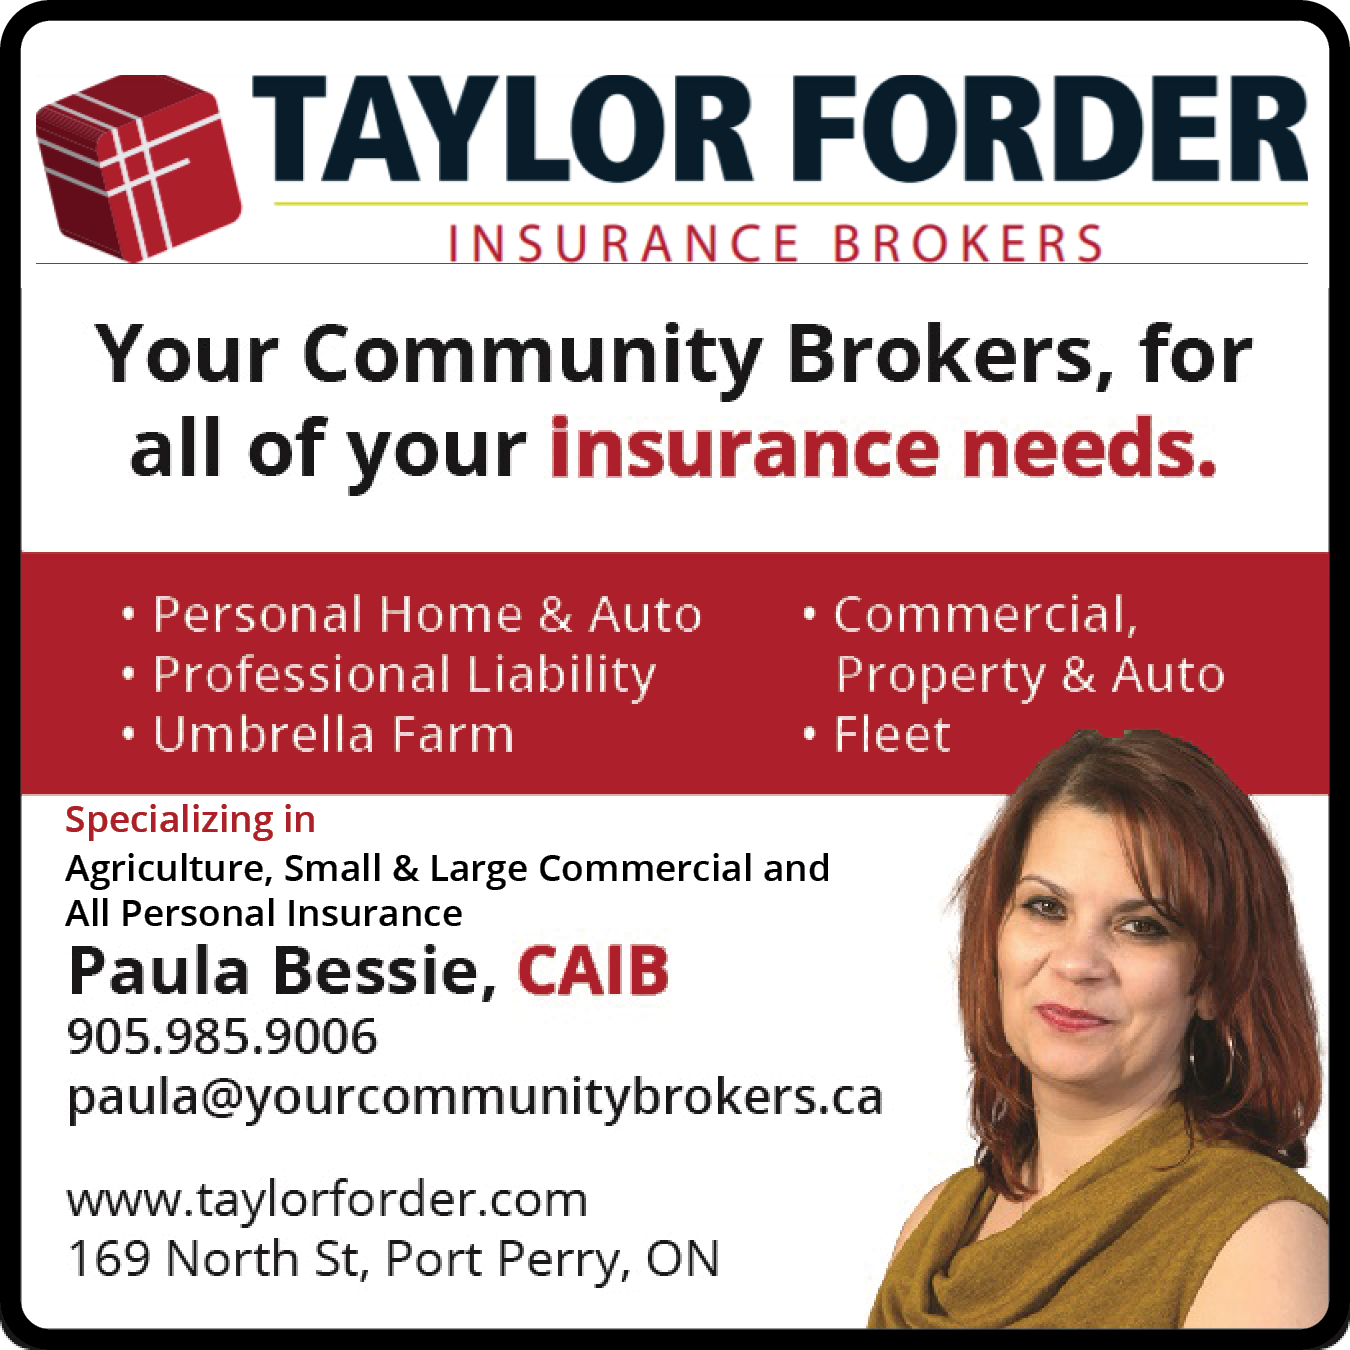 Taylor Forder Insurance